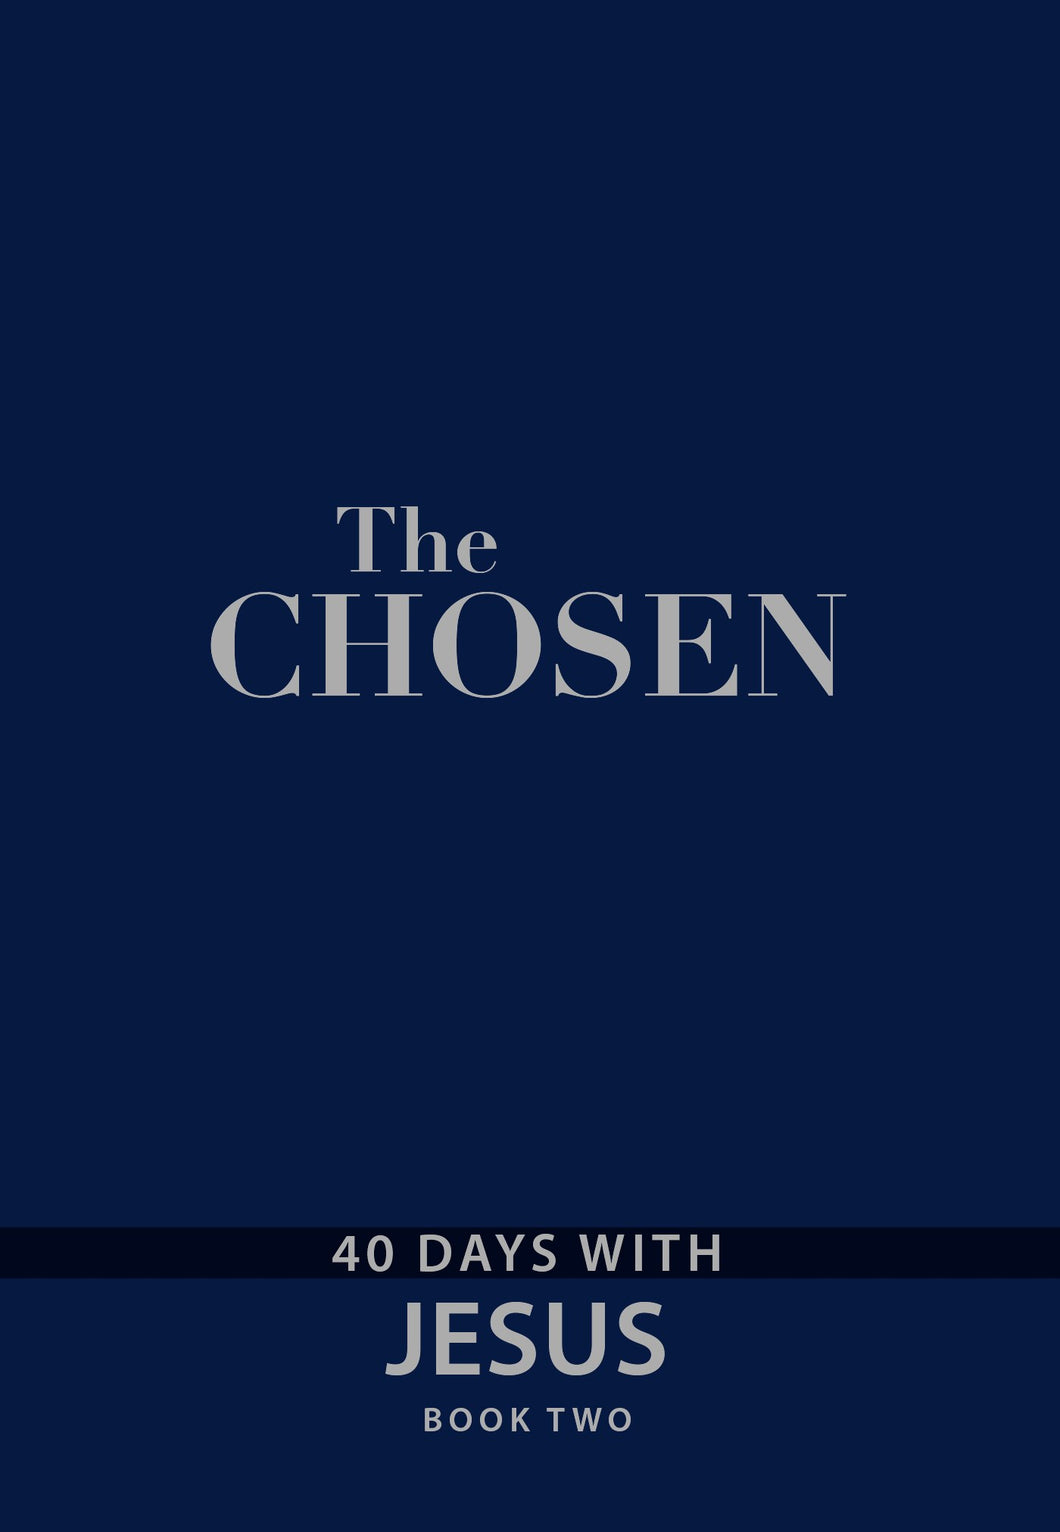 Book Two: 40 Days With Jesus